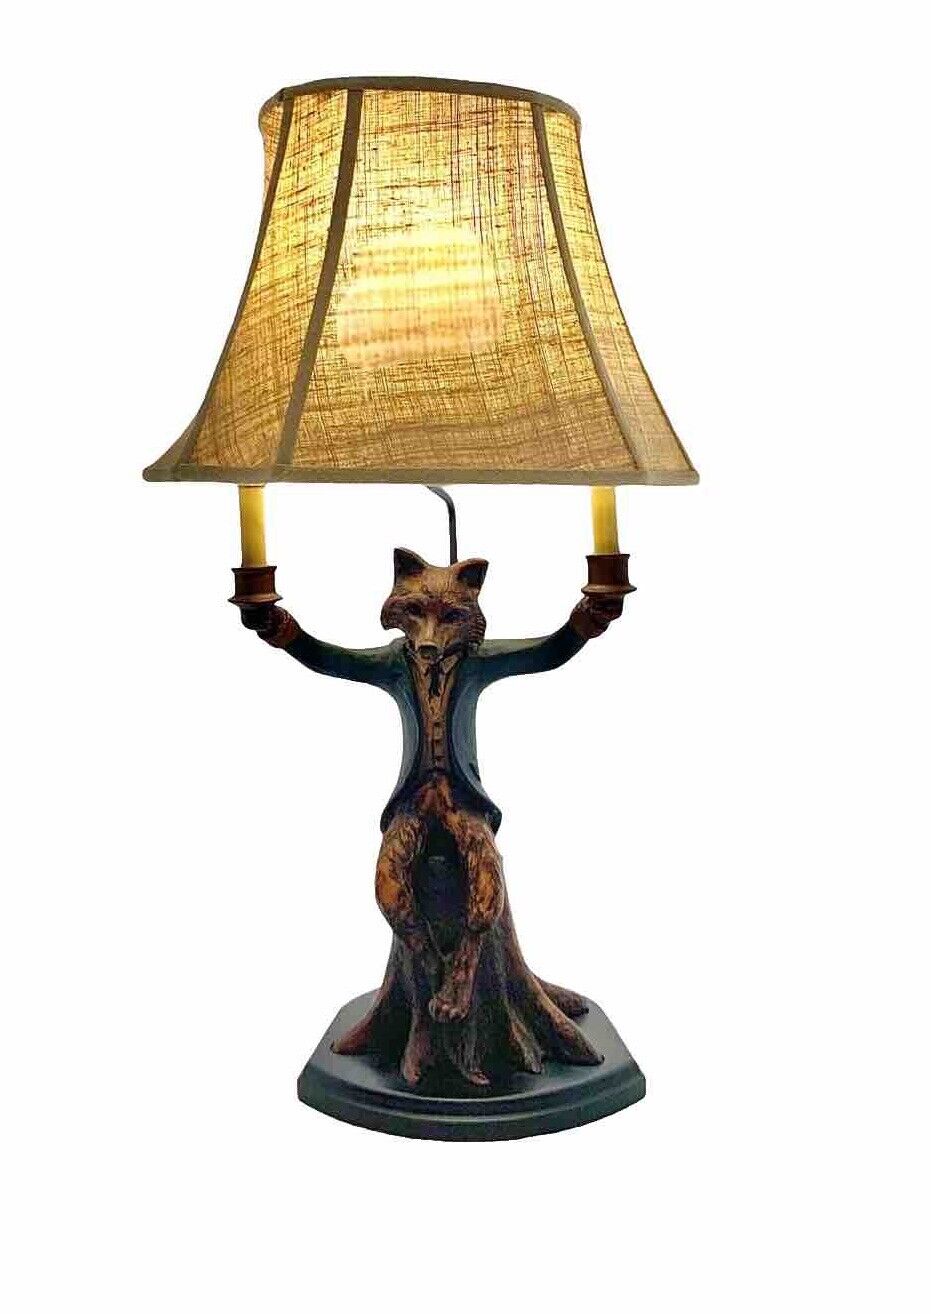 Fox Lamp in Suit Large Signed Huebbe 1988 Vintage Whimsical Equestrian Decor